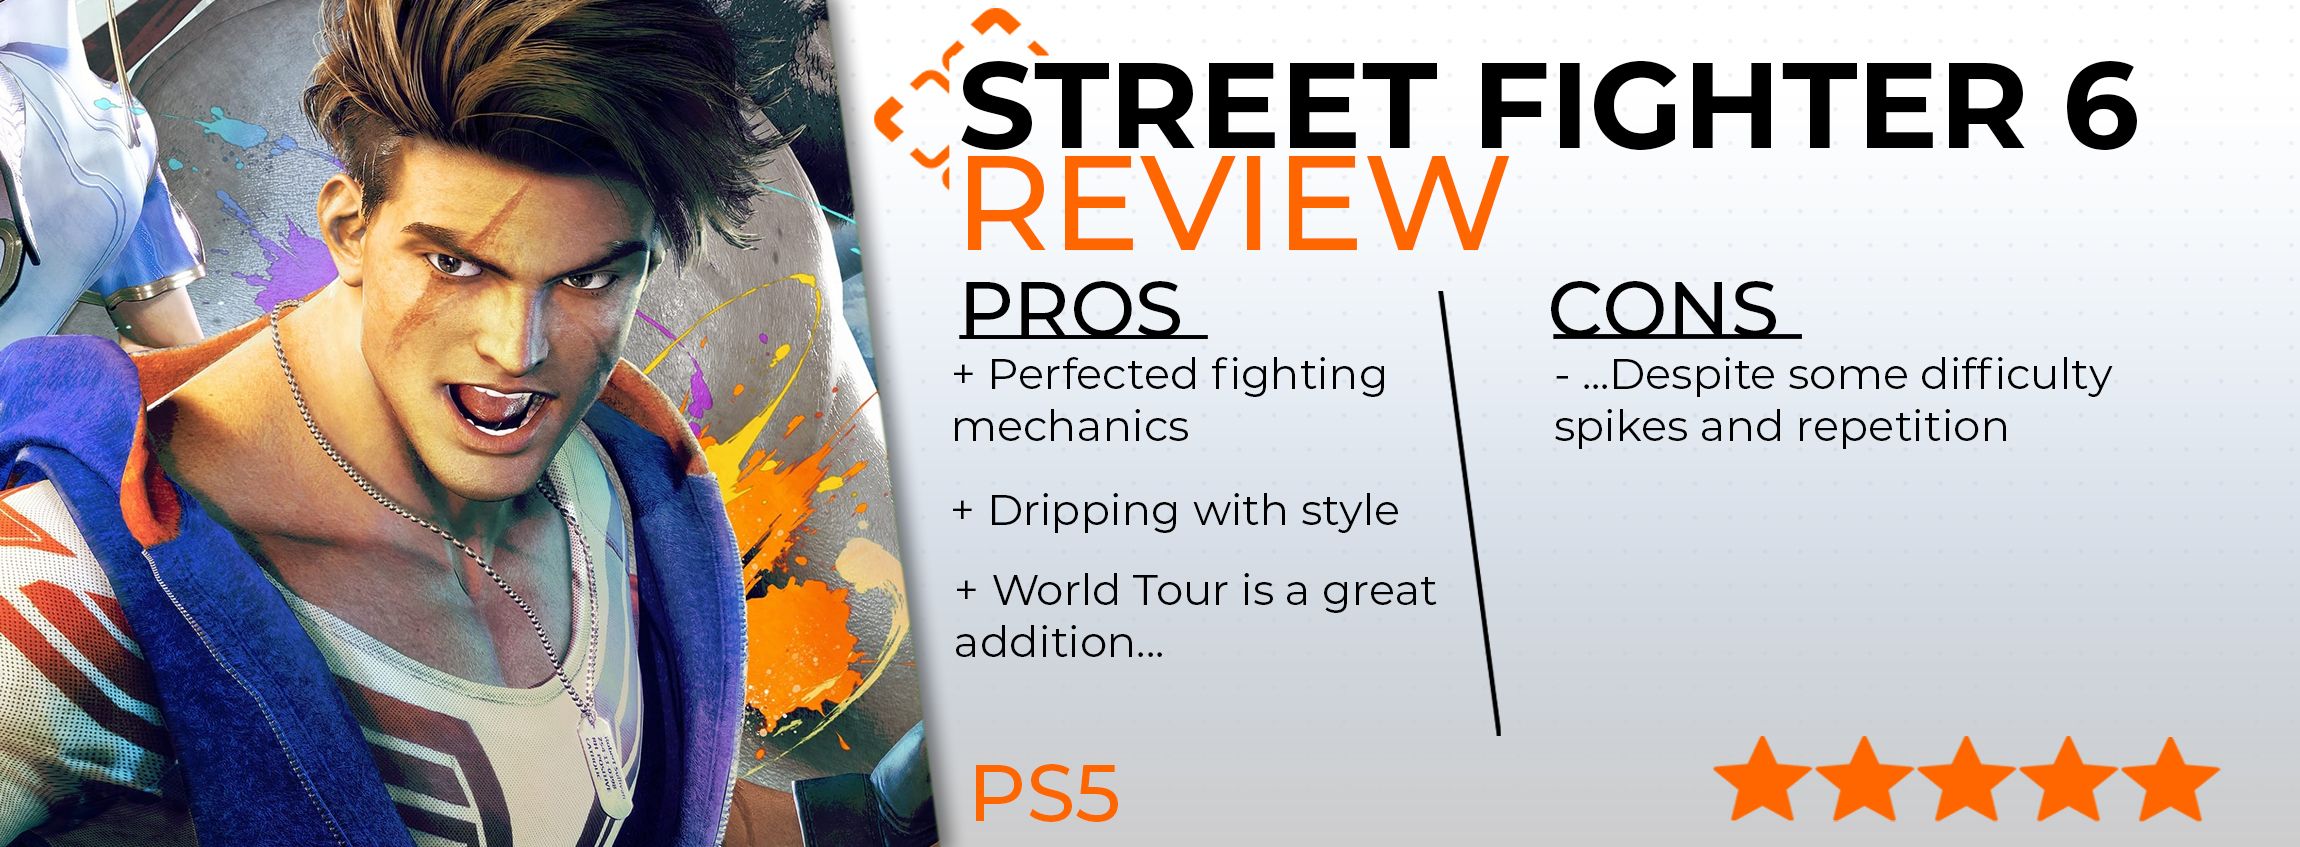 Street Fighter 6's review card.